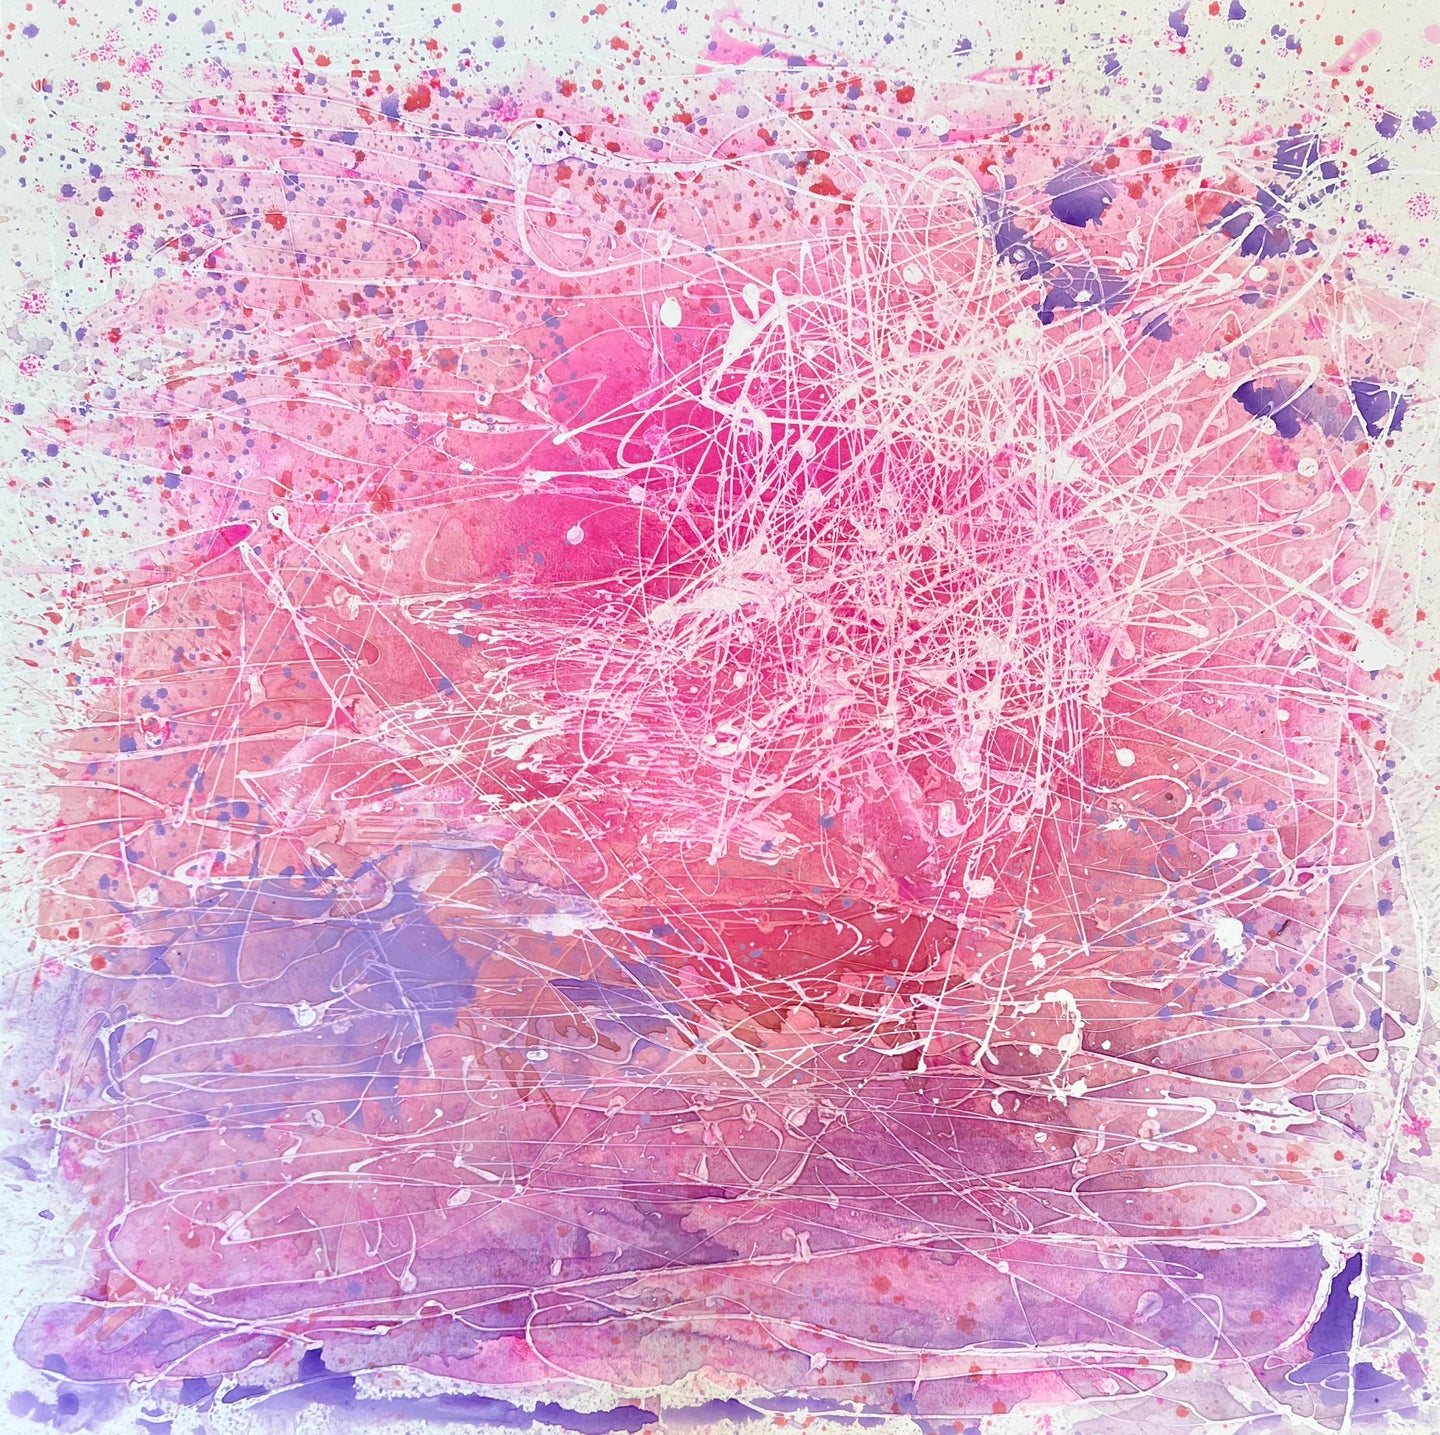 Abstract Expressionist artist J. Steven Manolis', Santa Catalina Sunset 1, pink and purples abstract wall art on canvas, 2023, Acrylic on paper, 48 x 48 inches